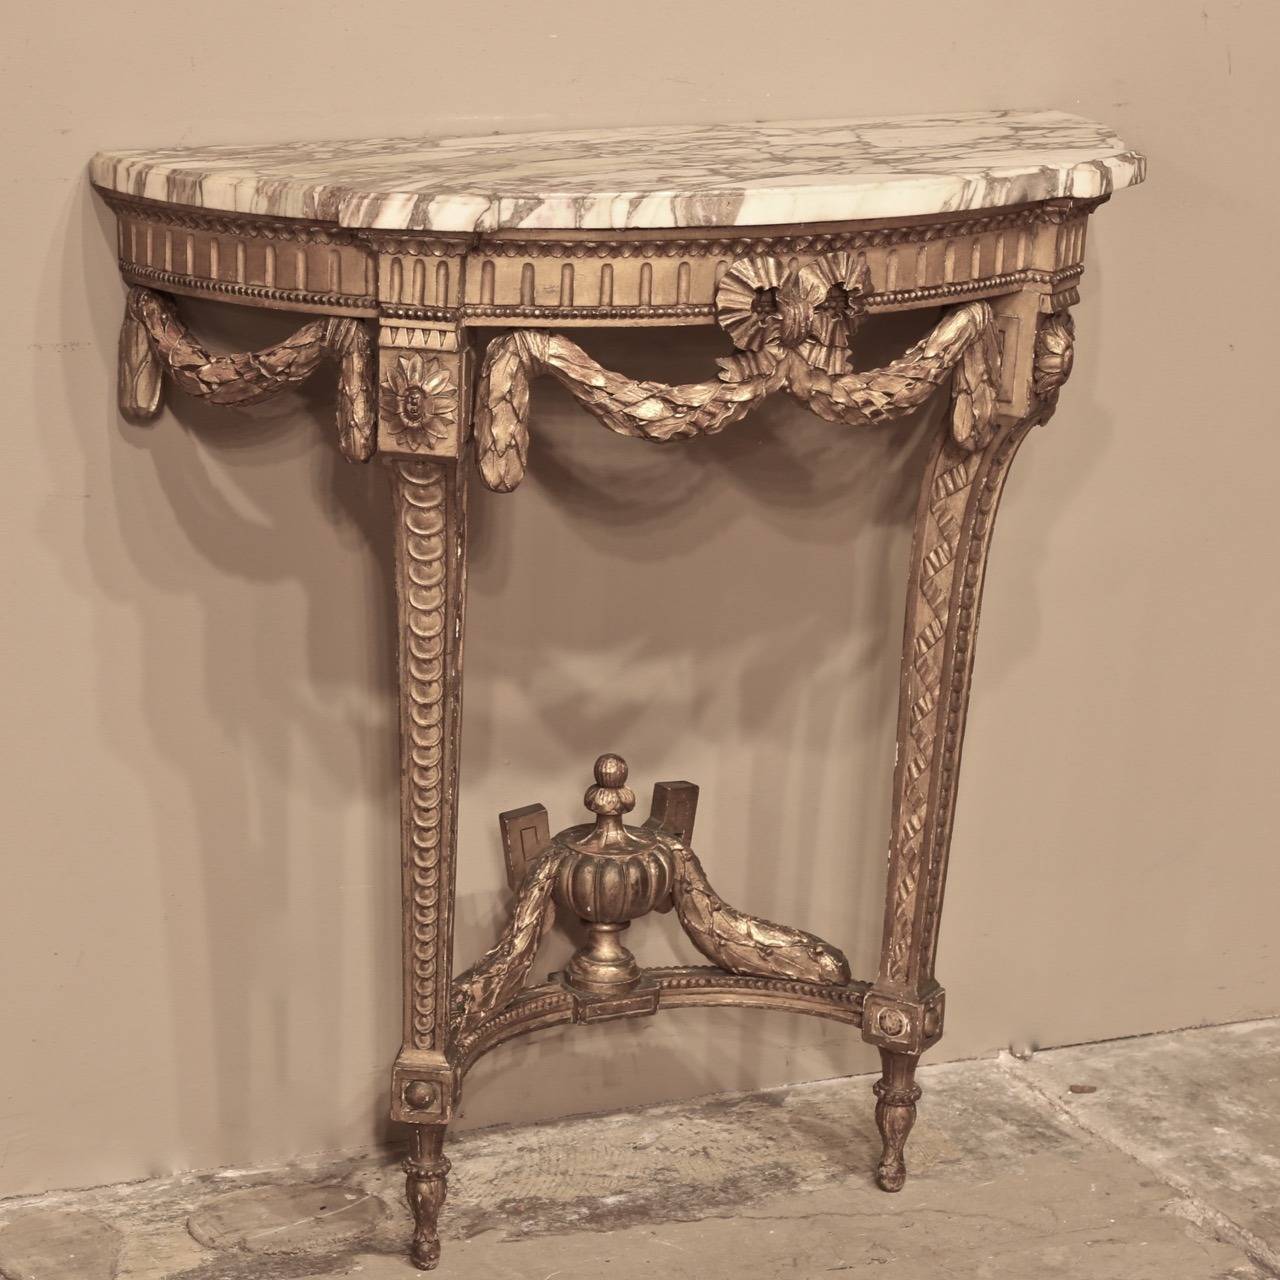 Resplendent with neoclassical style fervor, this magnificent Nineteenth Century French Louis XVI Giltwood Console has been carved with timeless laurel swags, urns and floral accents, and is topped with its original contoured and beveled marble. 